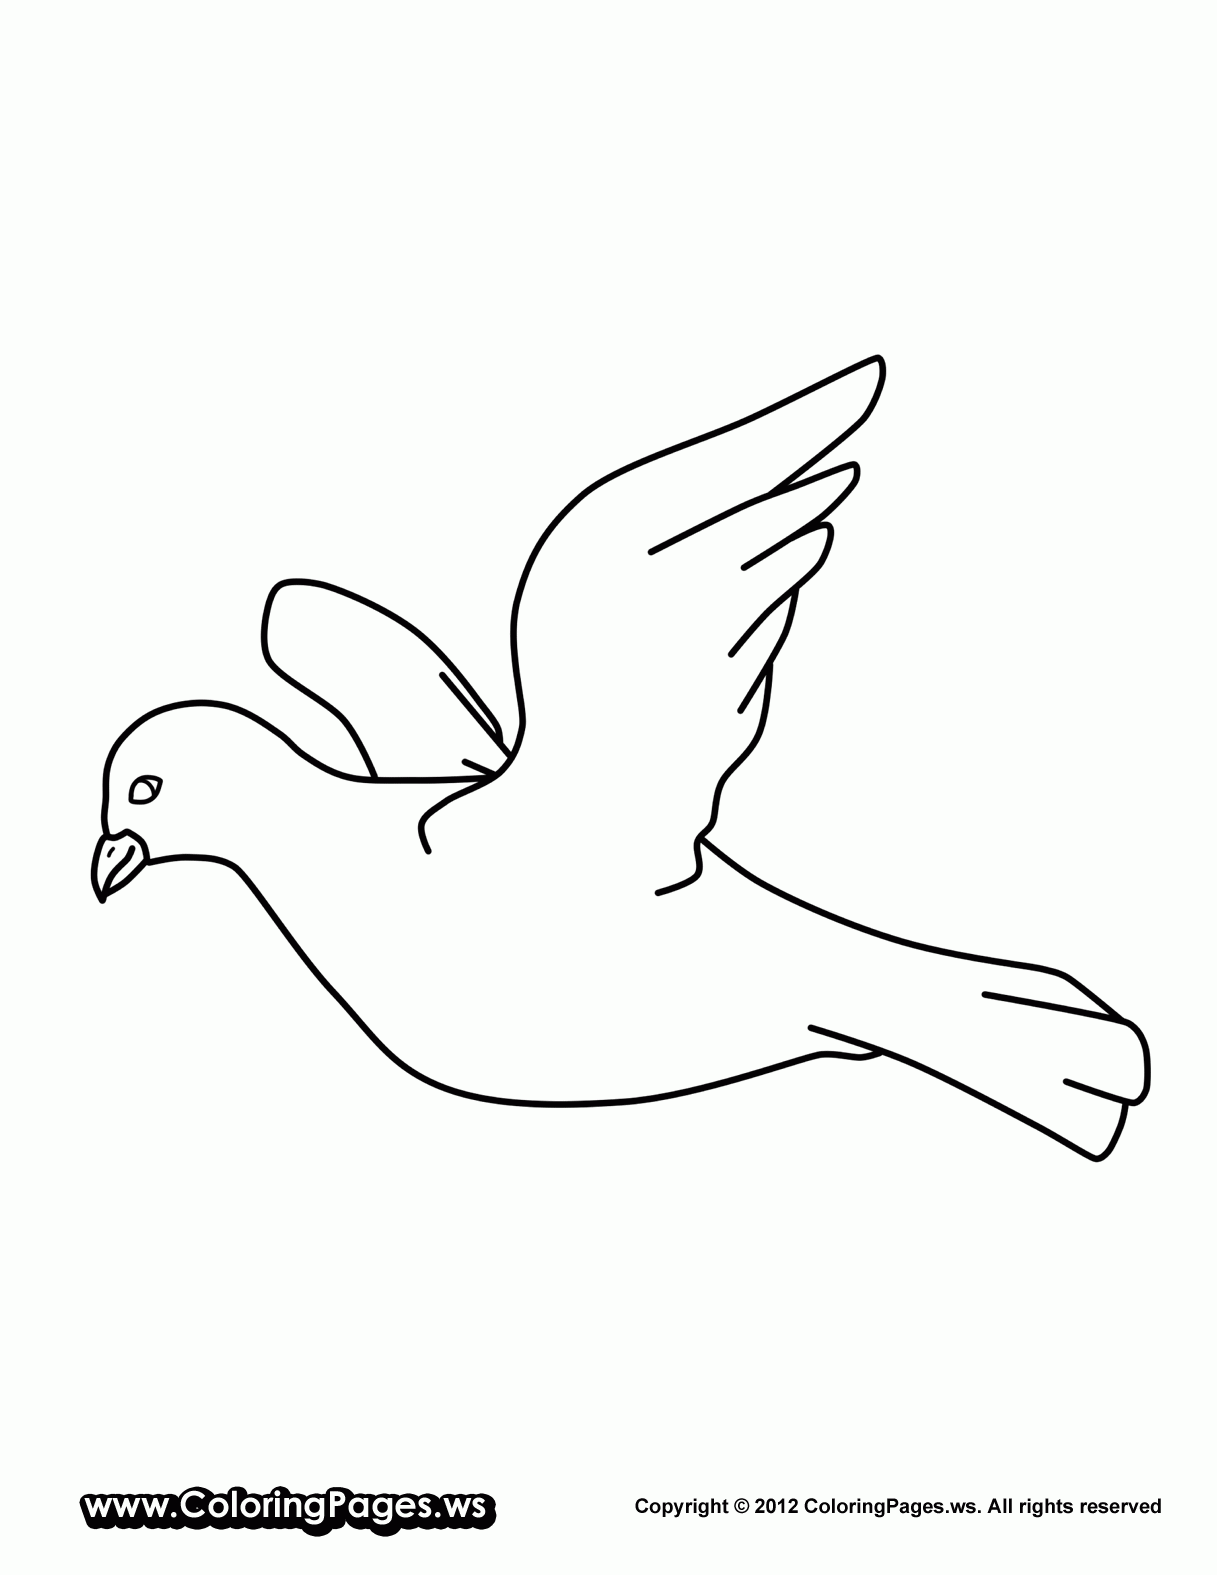 How To Make Doves Coloring Pages Free Coloring Pages - Widetheme